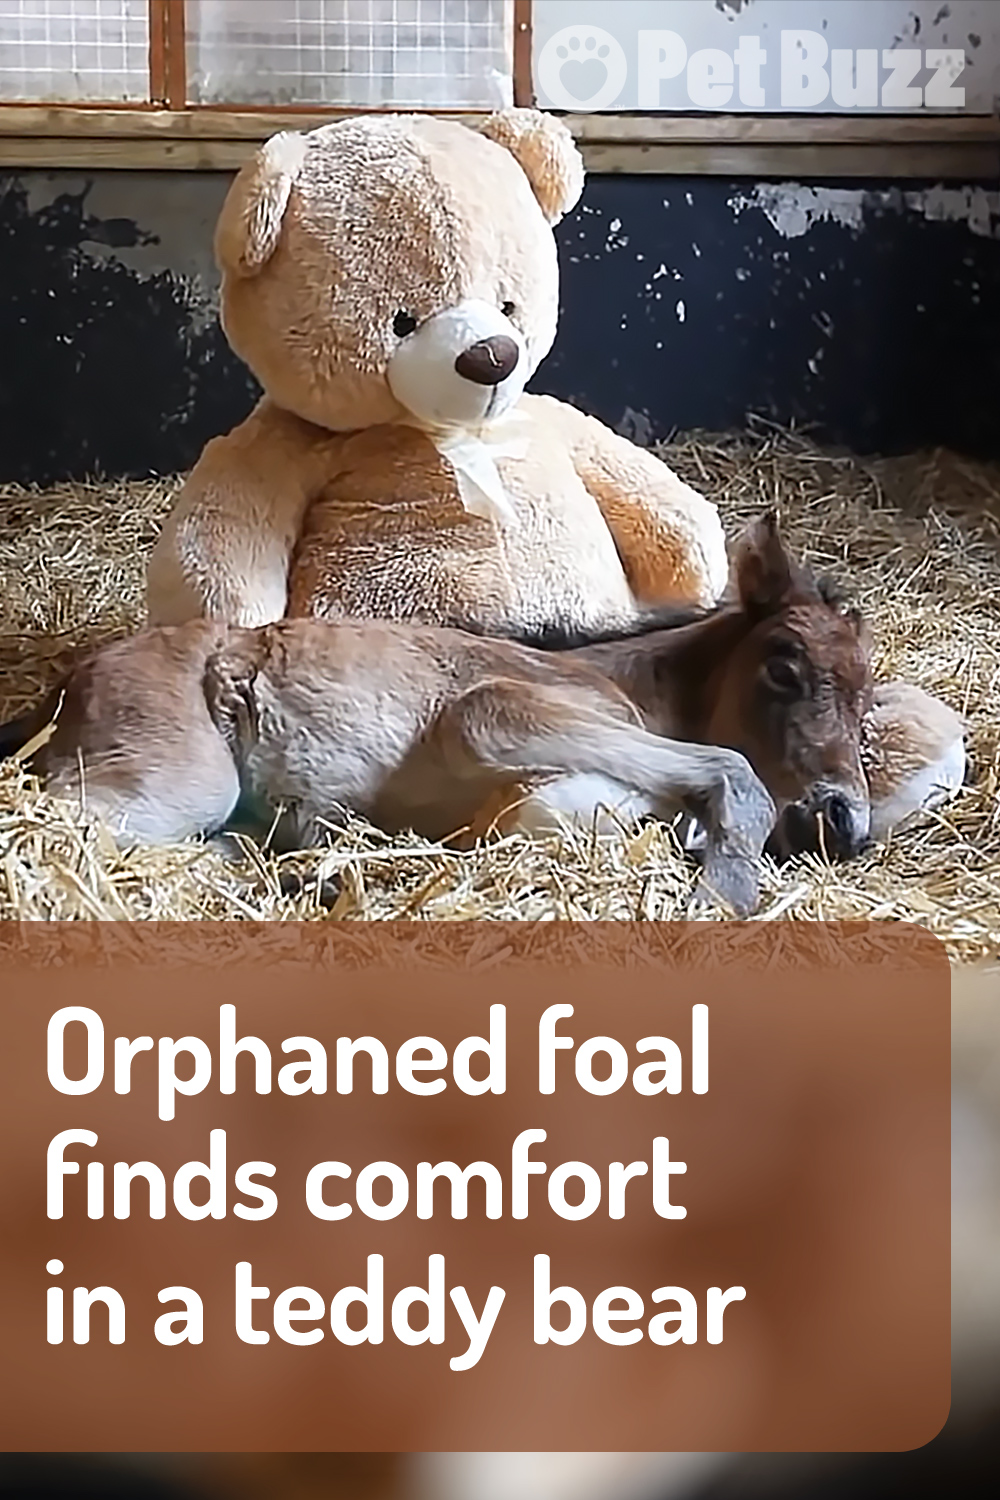 Orphaned foal finds comfort in a teddy bear